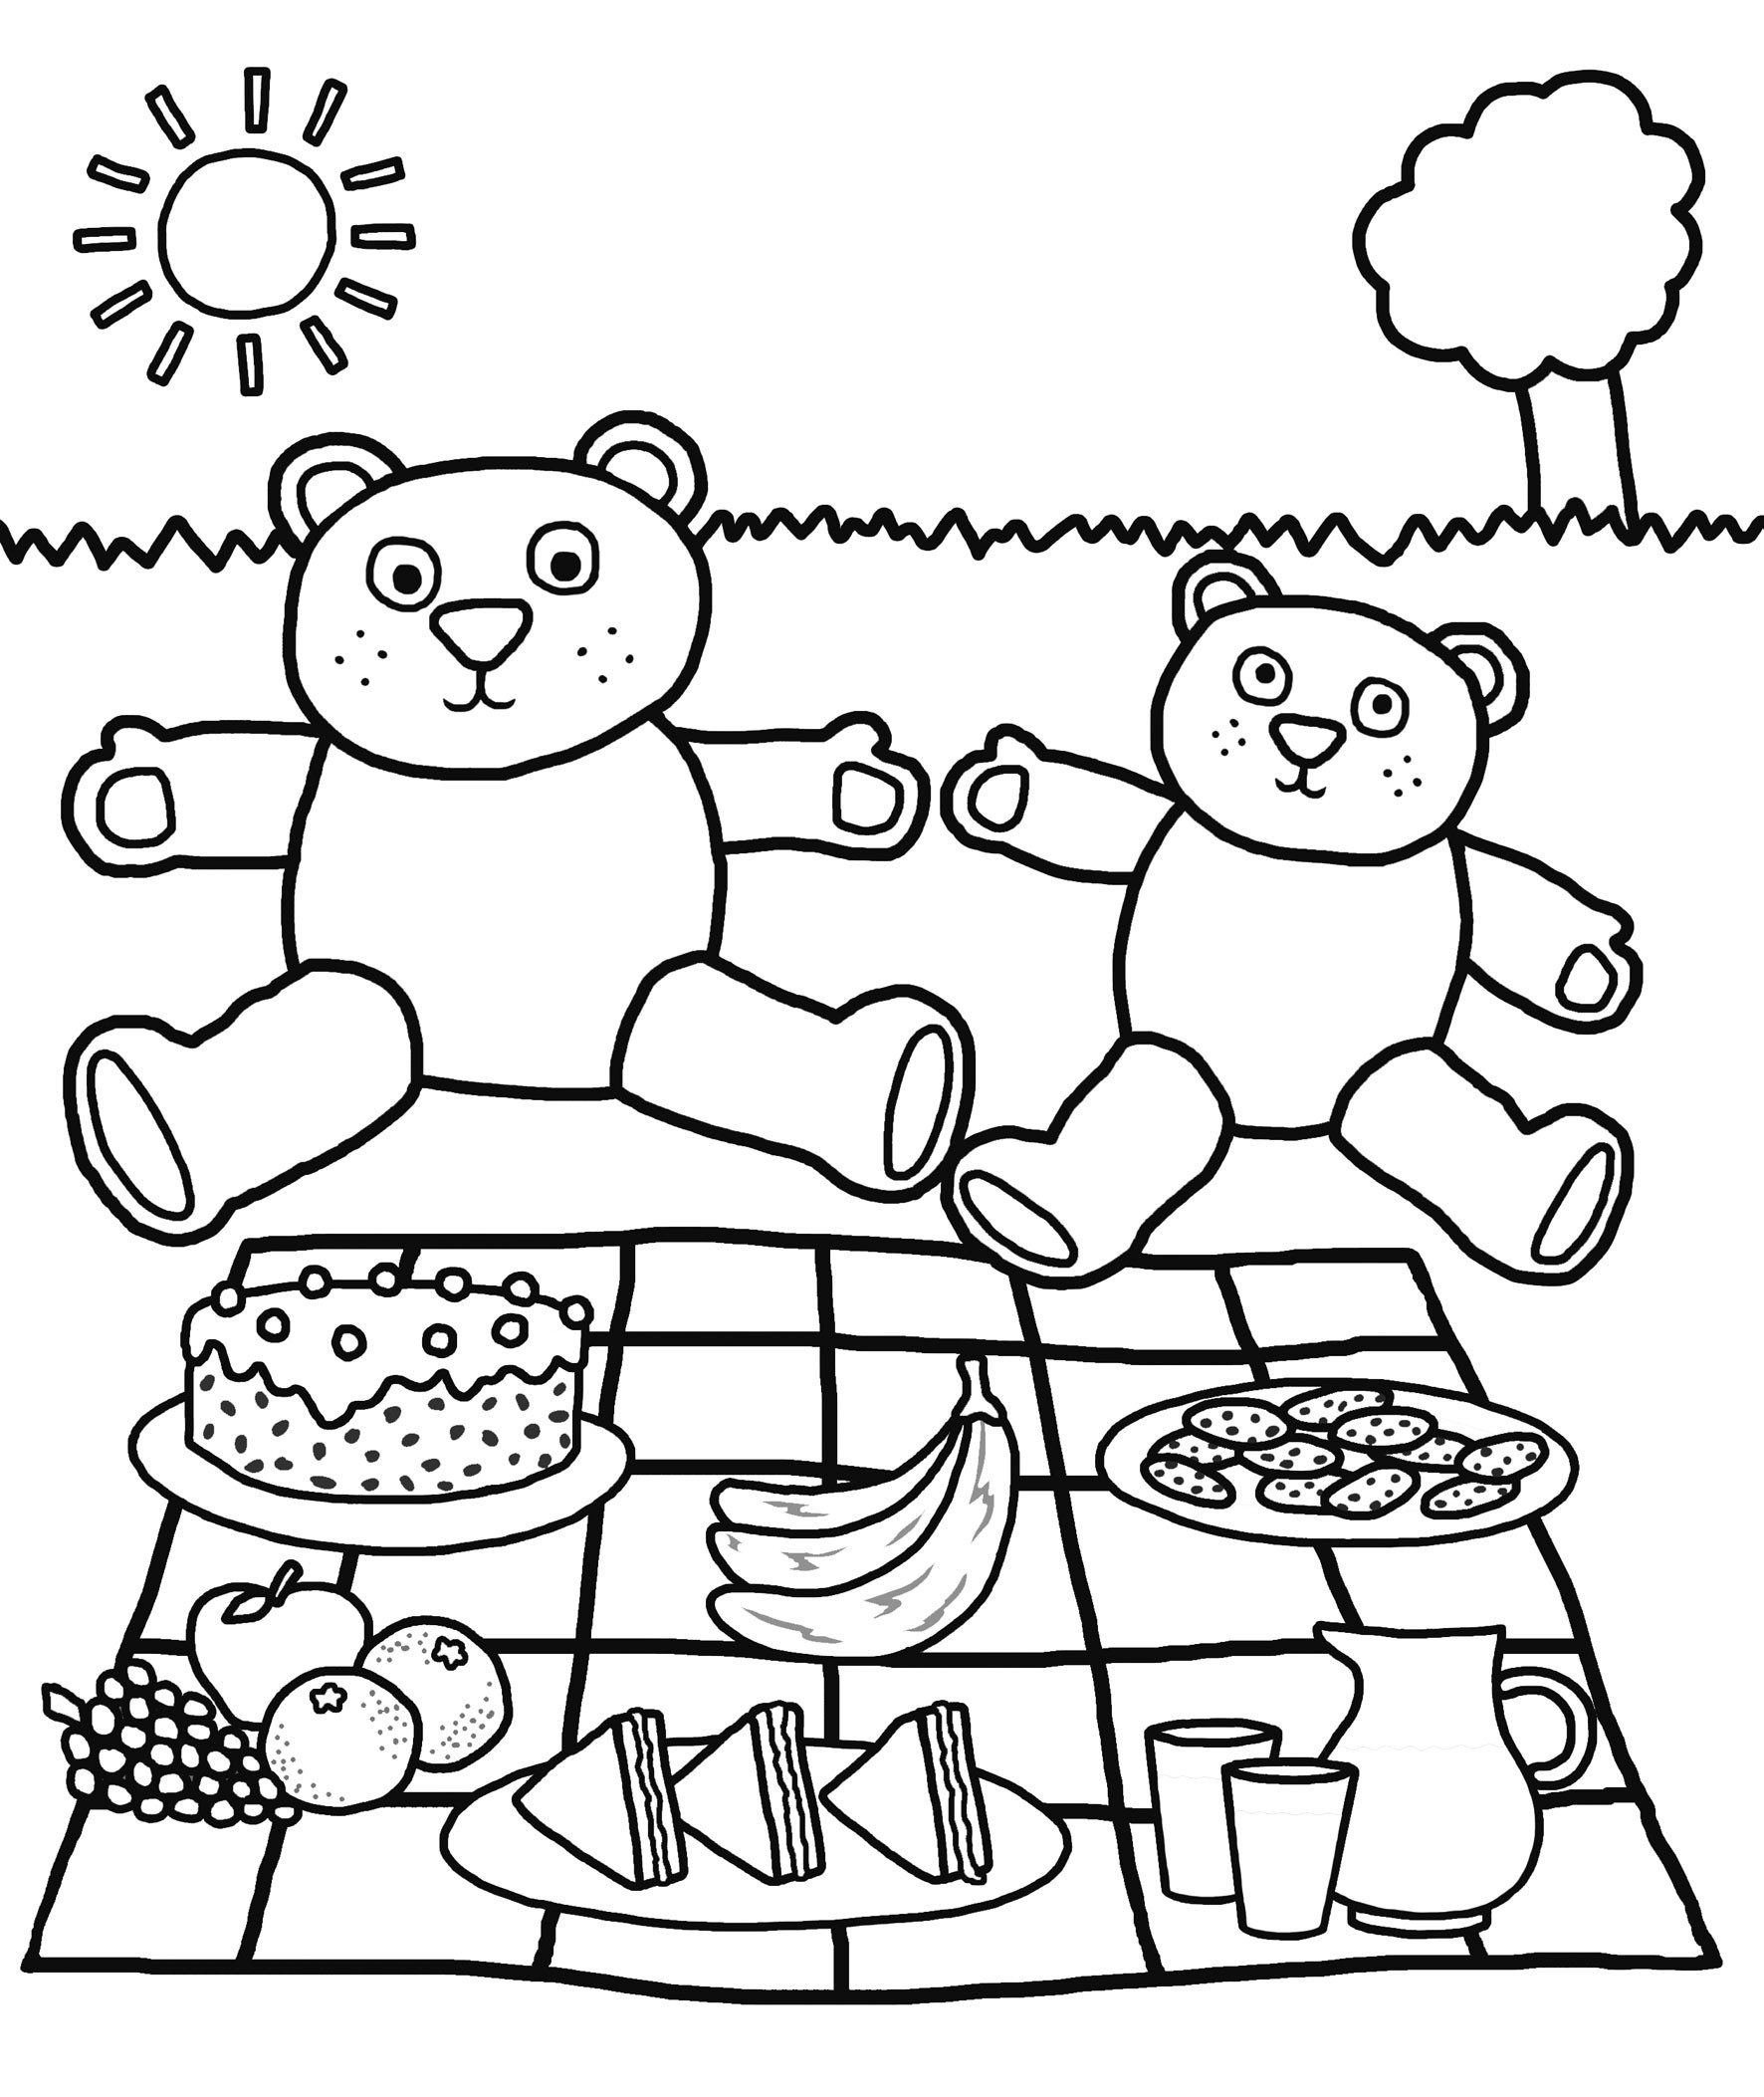 Free Preschool Coloring Pages
 Free Printable Kindergarten Coloring Pages For Kids